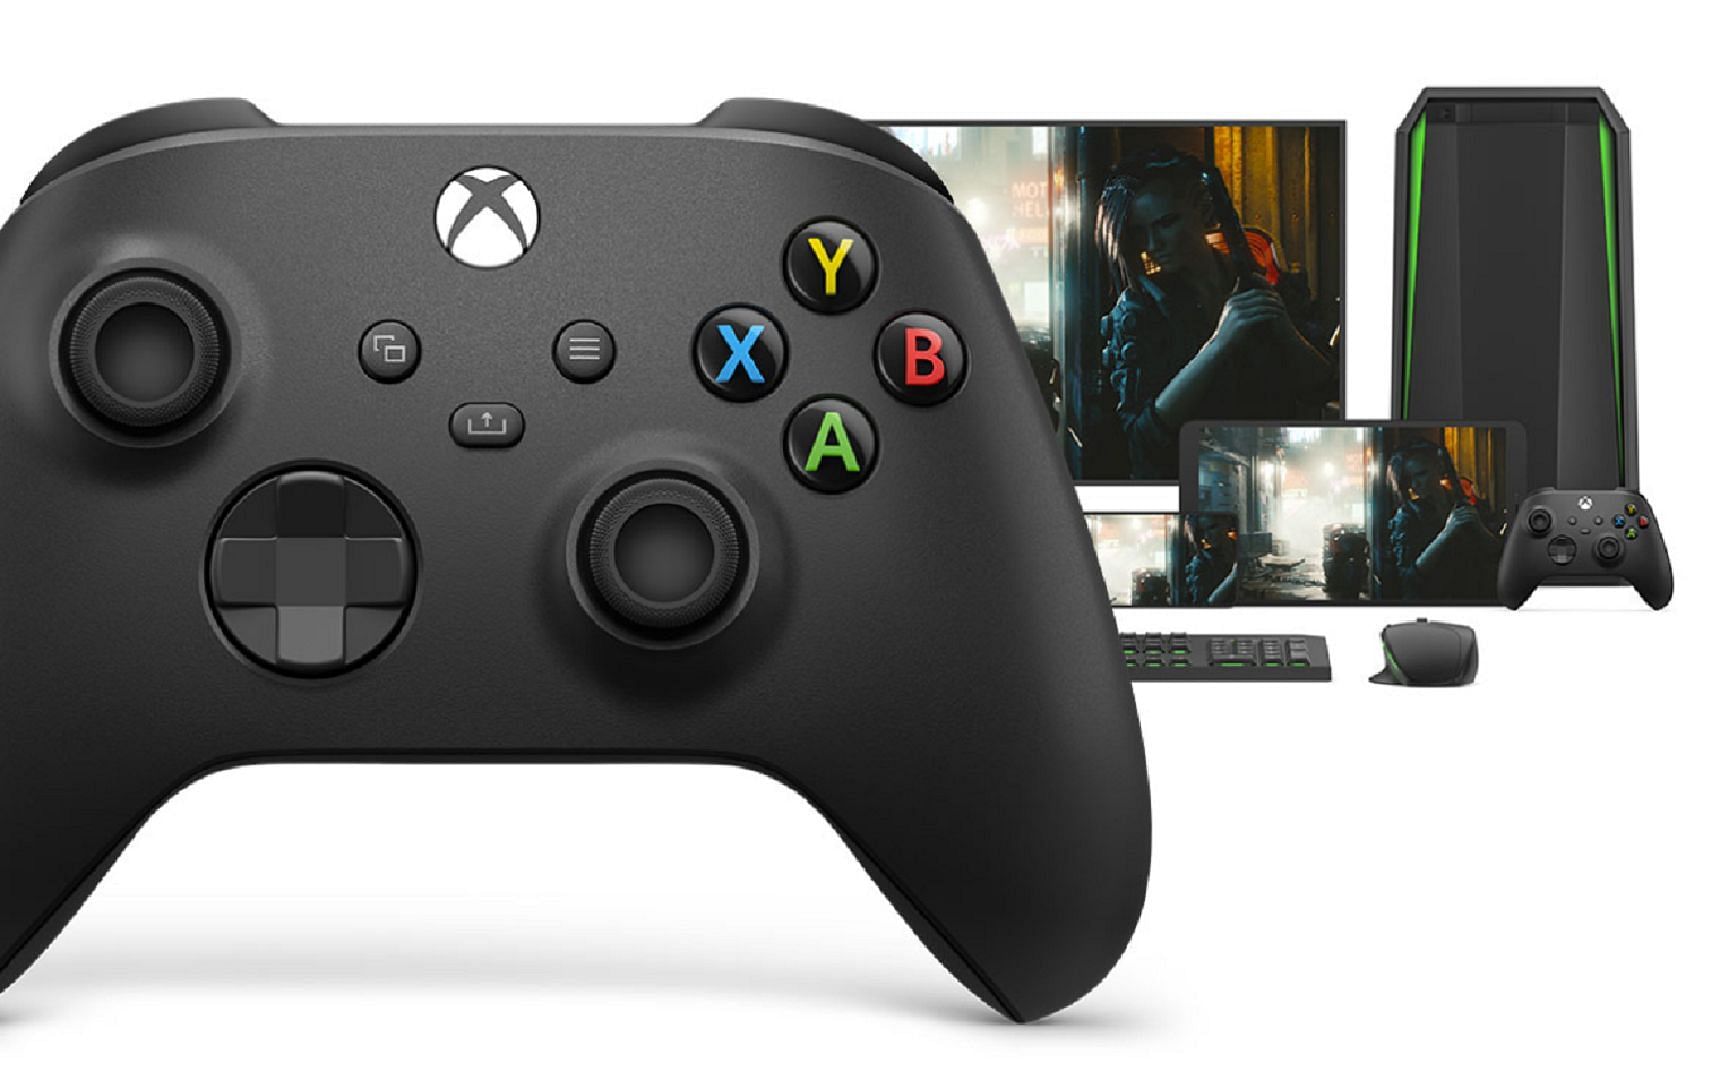 Picture of Xbox Controller hooked to a PC